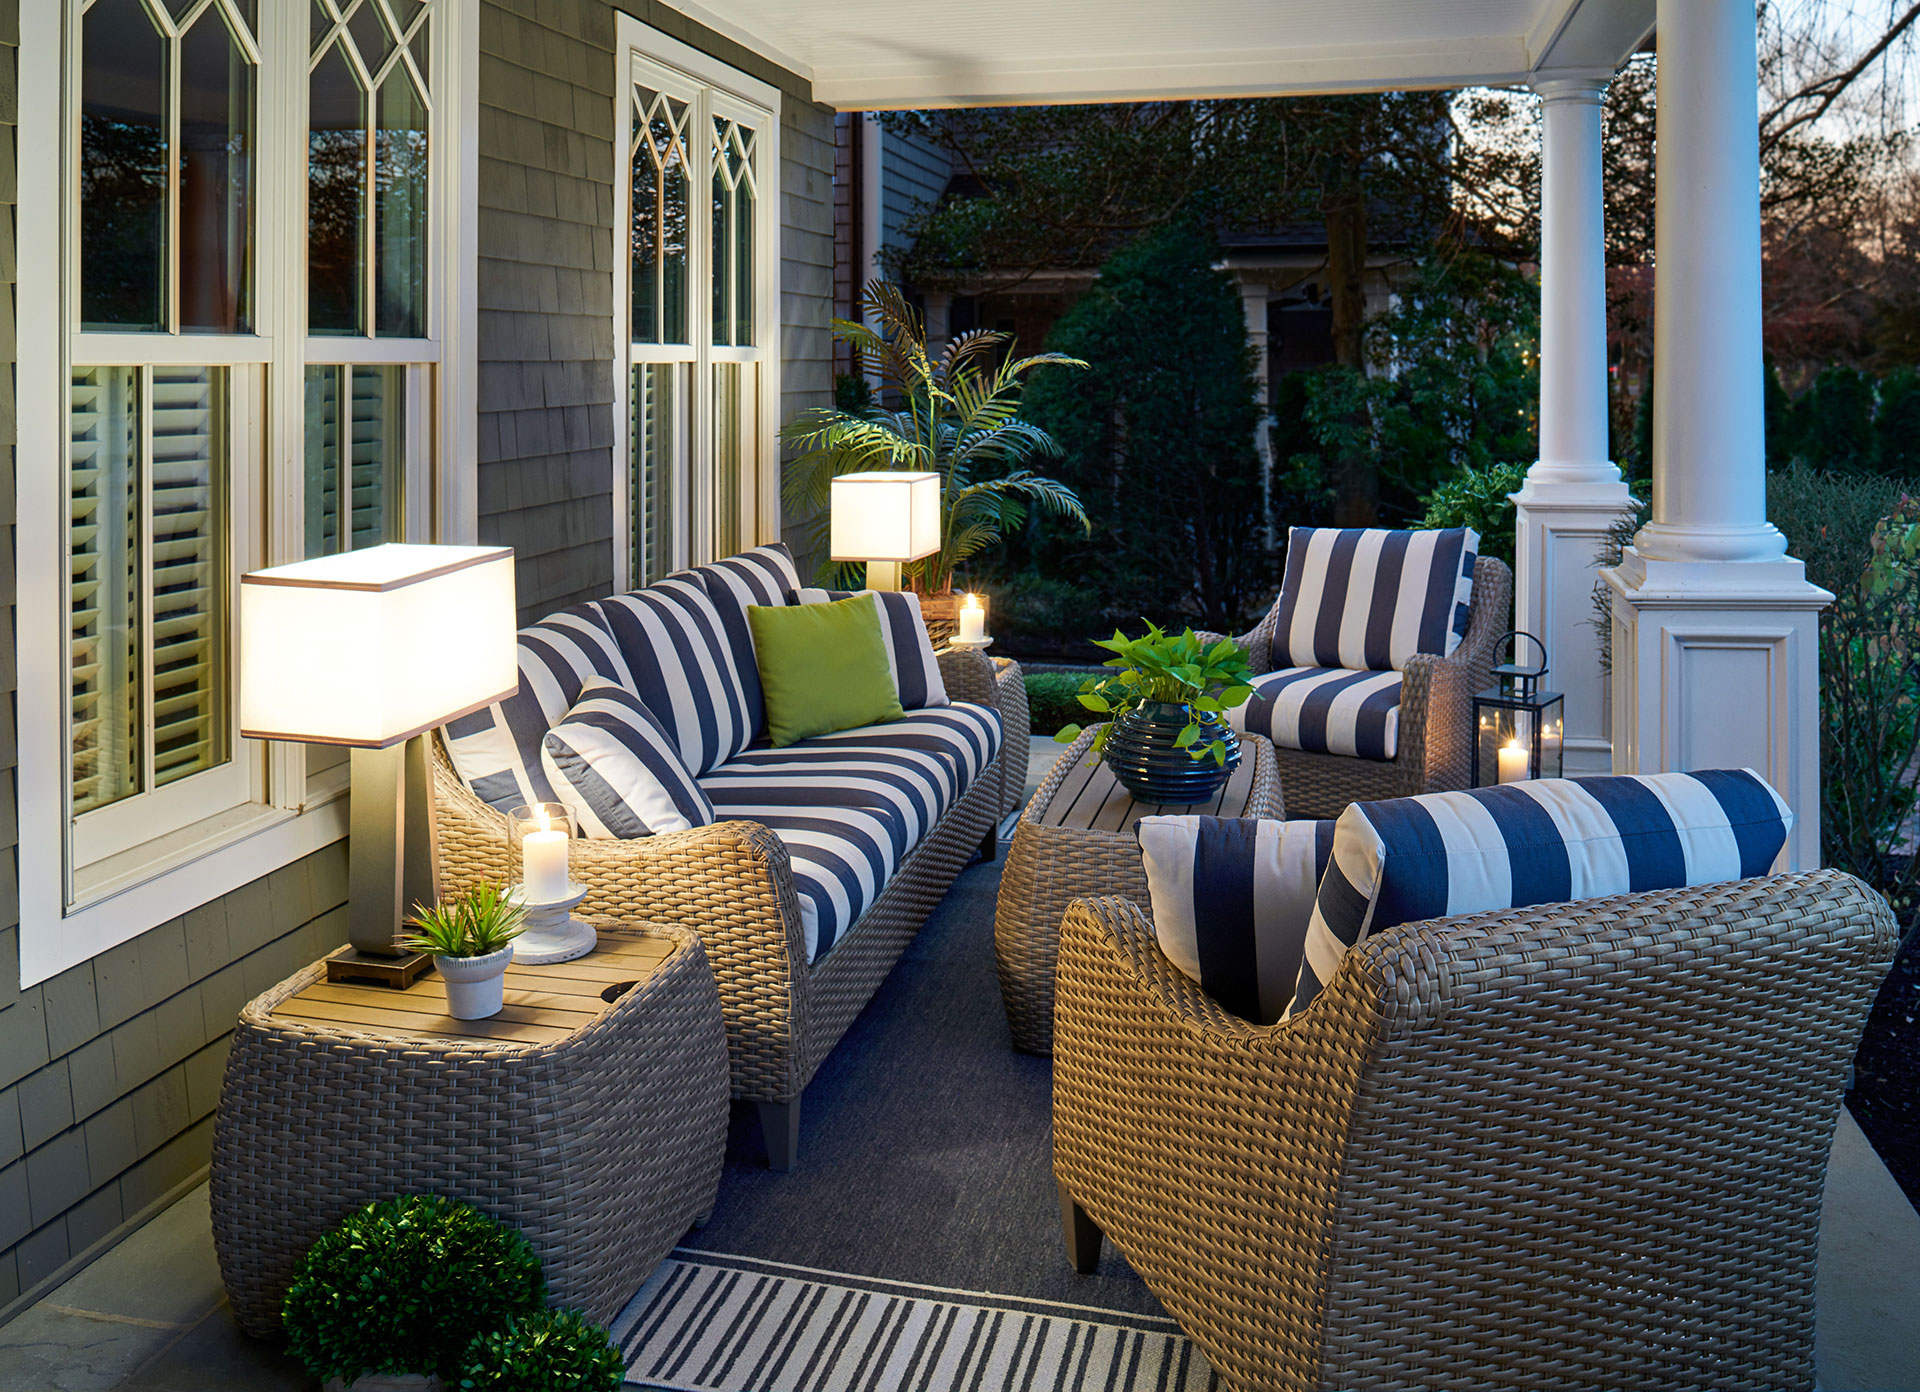 6 Smart Strategies For Designing An Outdoor Space That’s Best Set Up For You